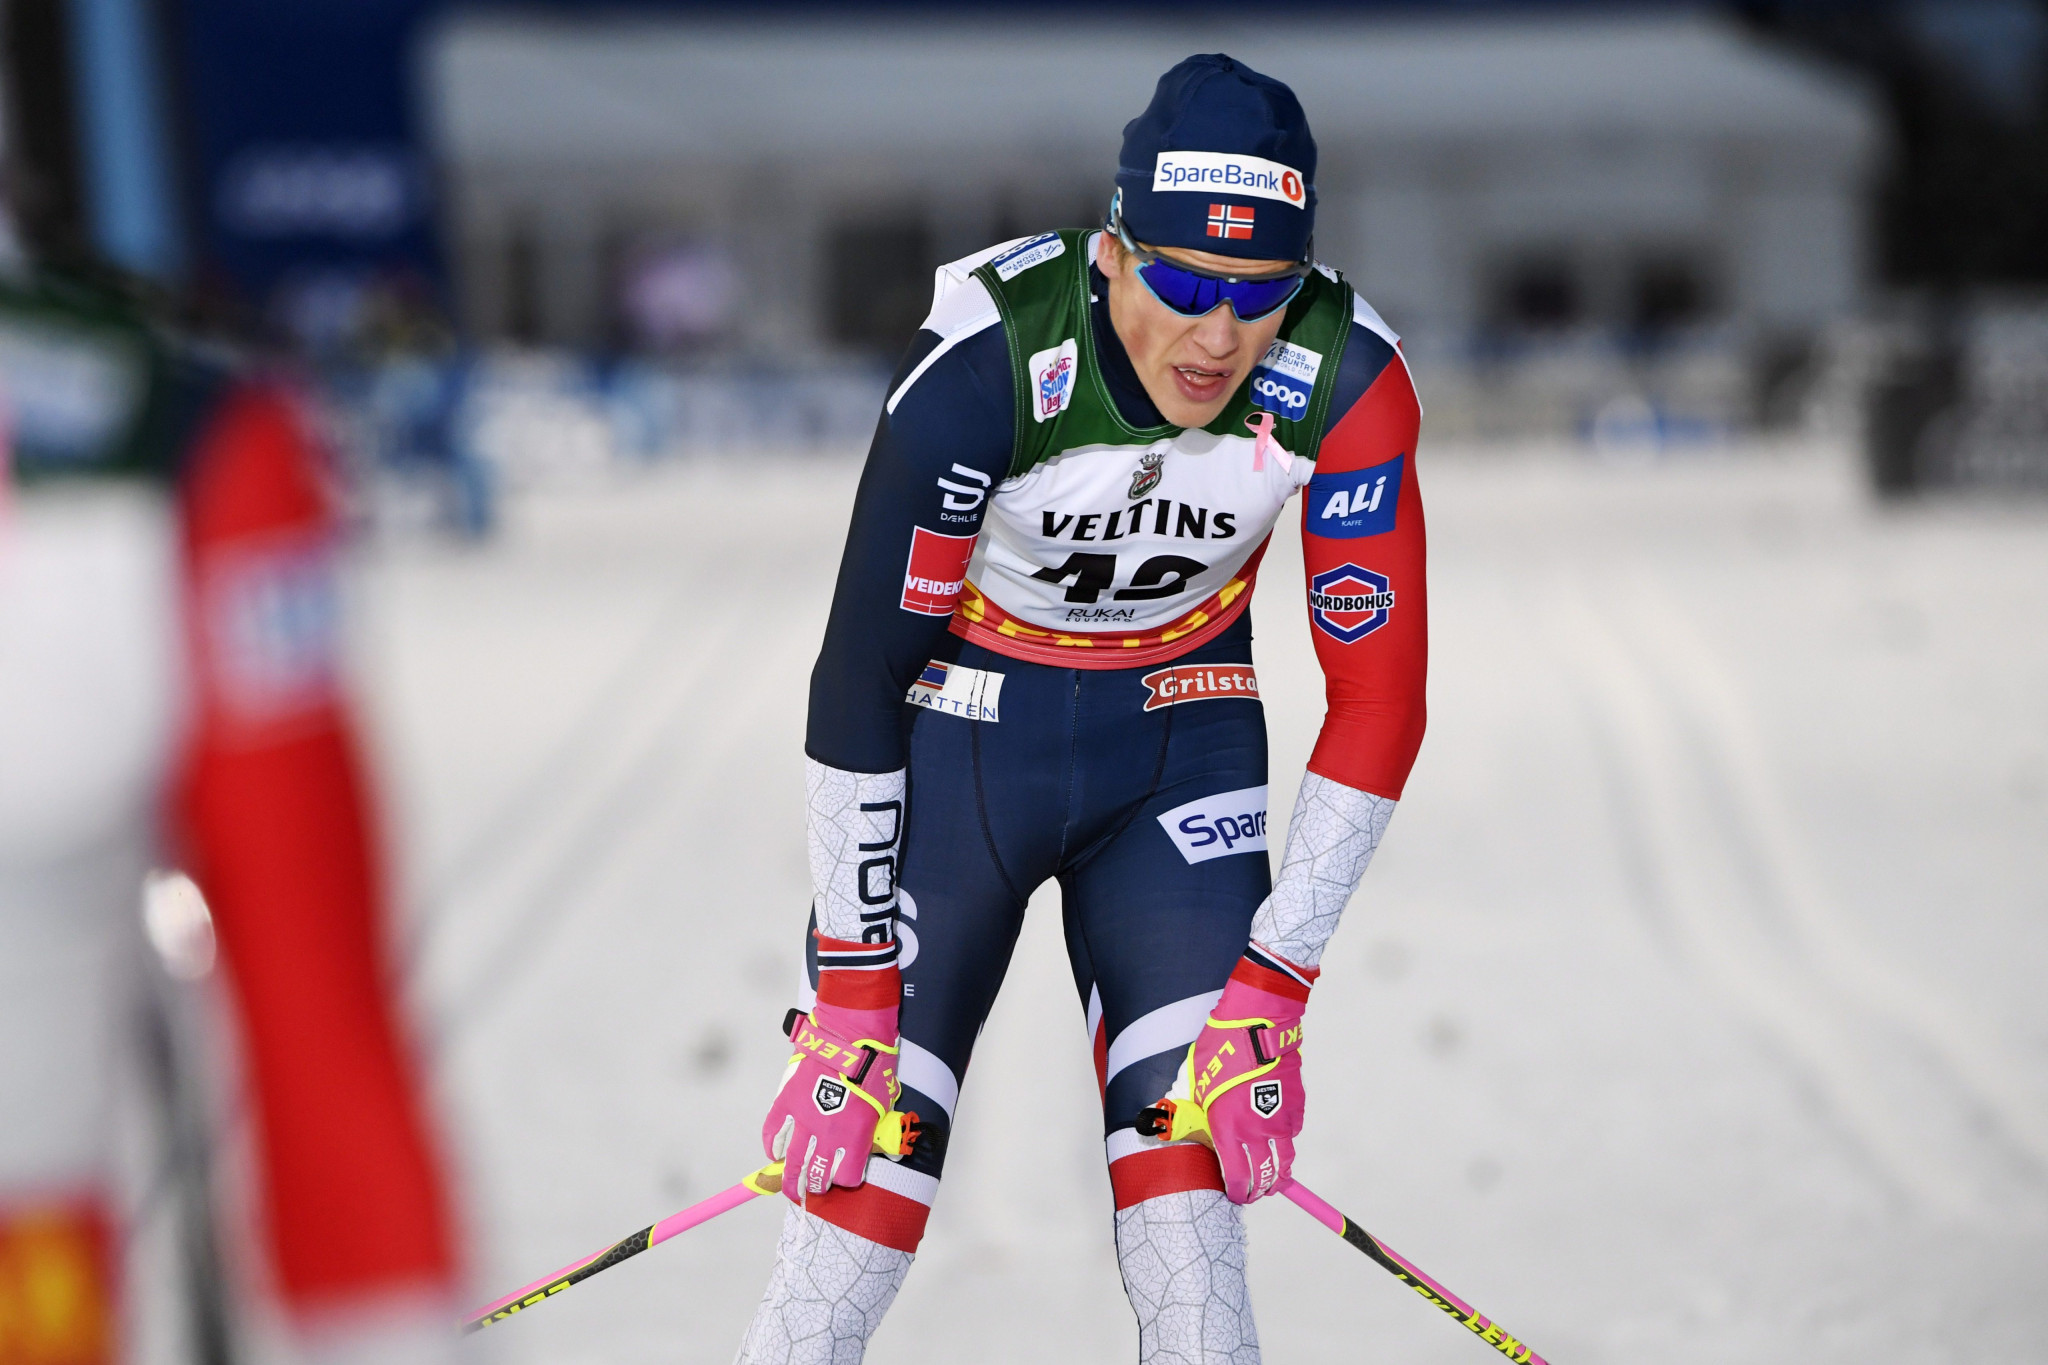 Triple Olympic gold medallist Johannes Høsflot Klæbo has got off to a winning start in the FIS Cross-Country Tour de Ski with victory in Toblach ©Getty Images